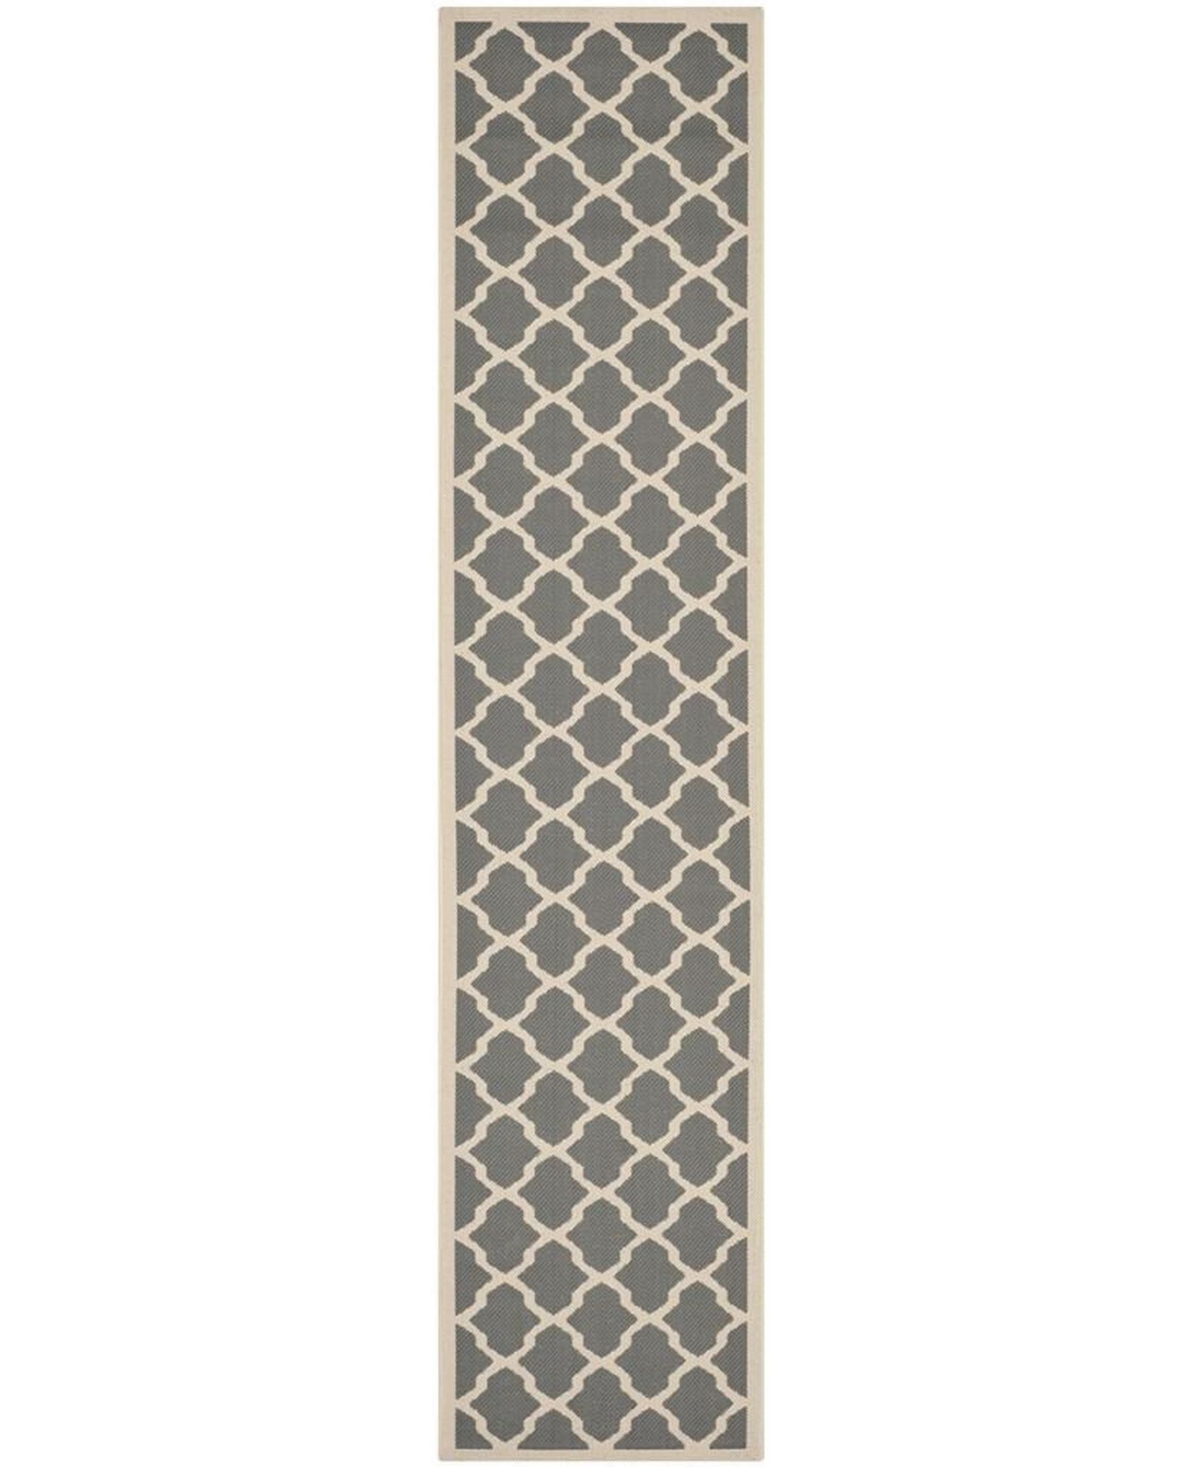 Safavieh Courtyard Cy6903 Anthracite And Beige 2'3" X 6'7" Sisal Weave Runner Outdoor Area Rug In Black